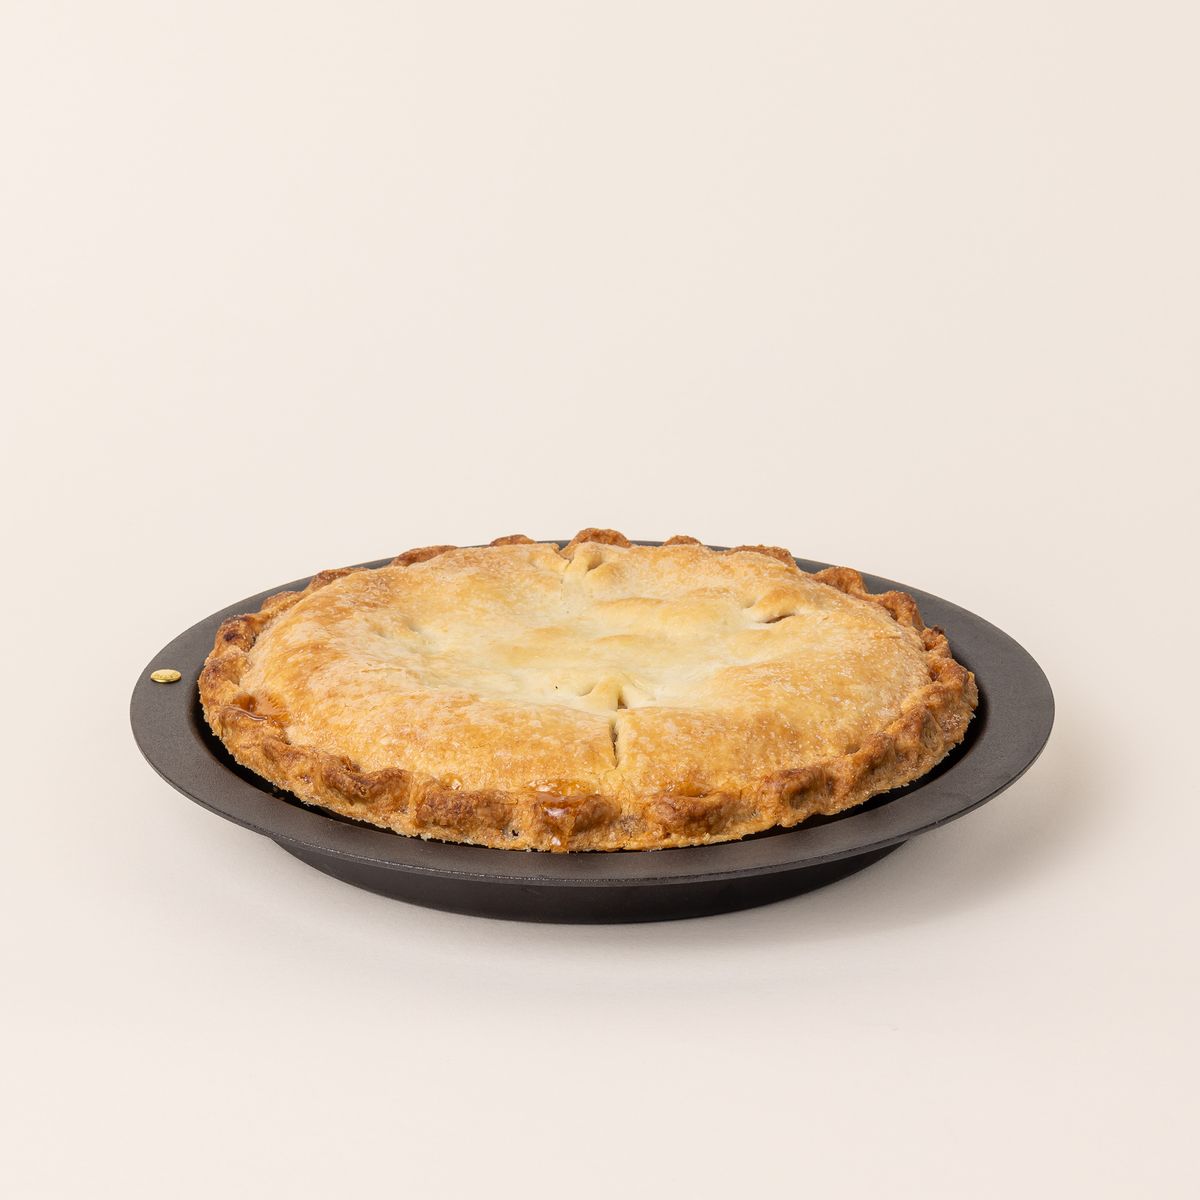 A full cooked pie in a simple iron pie plate with a wide rim and shallow body